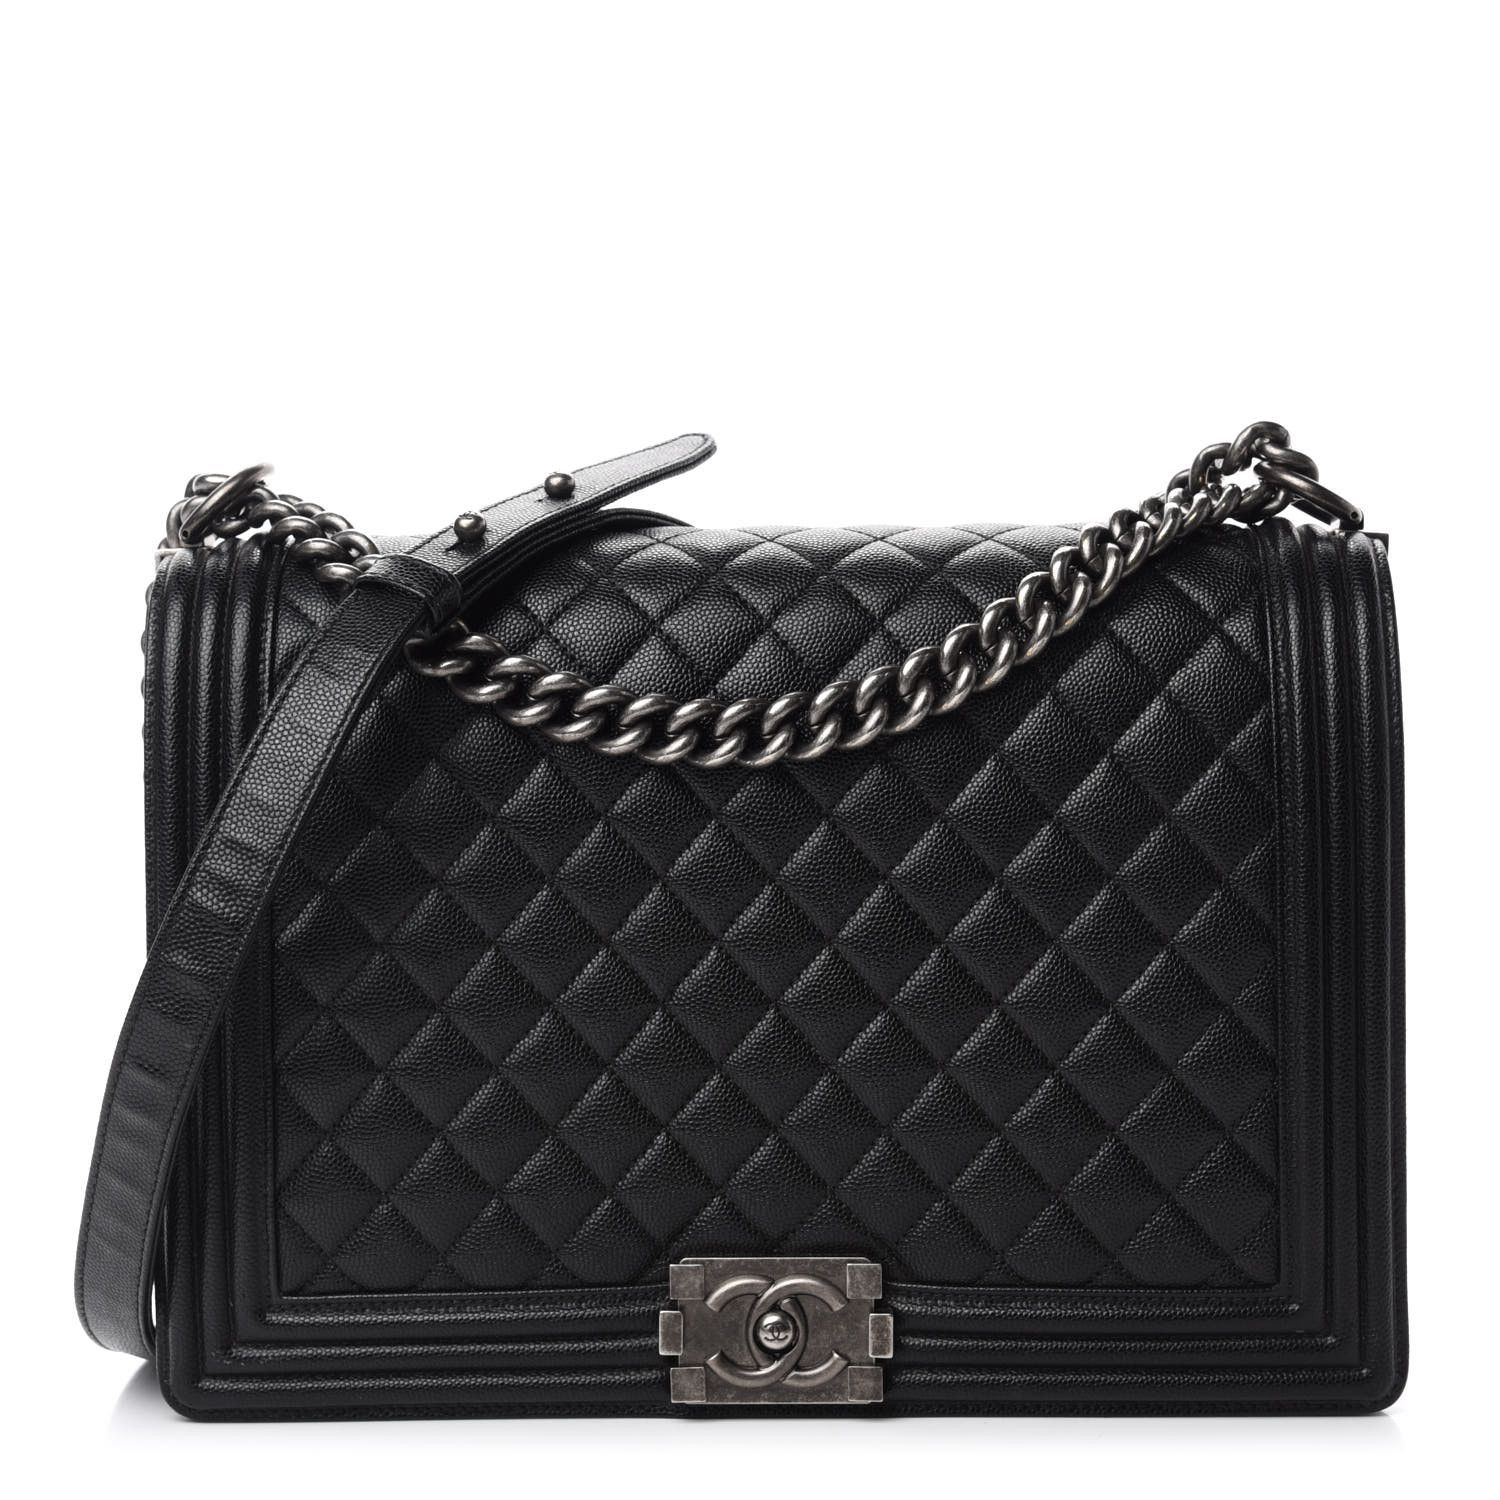 Caviar Quilted Large Boy Flap Black | Fashionphile